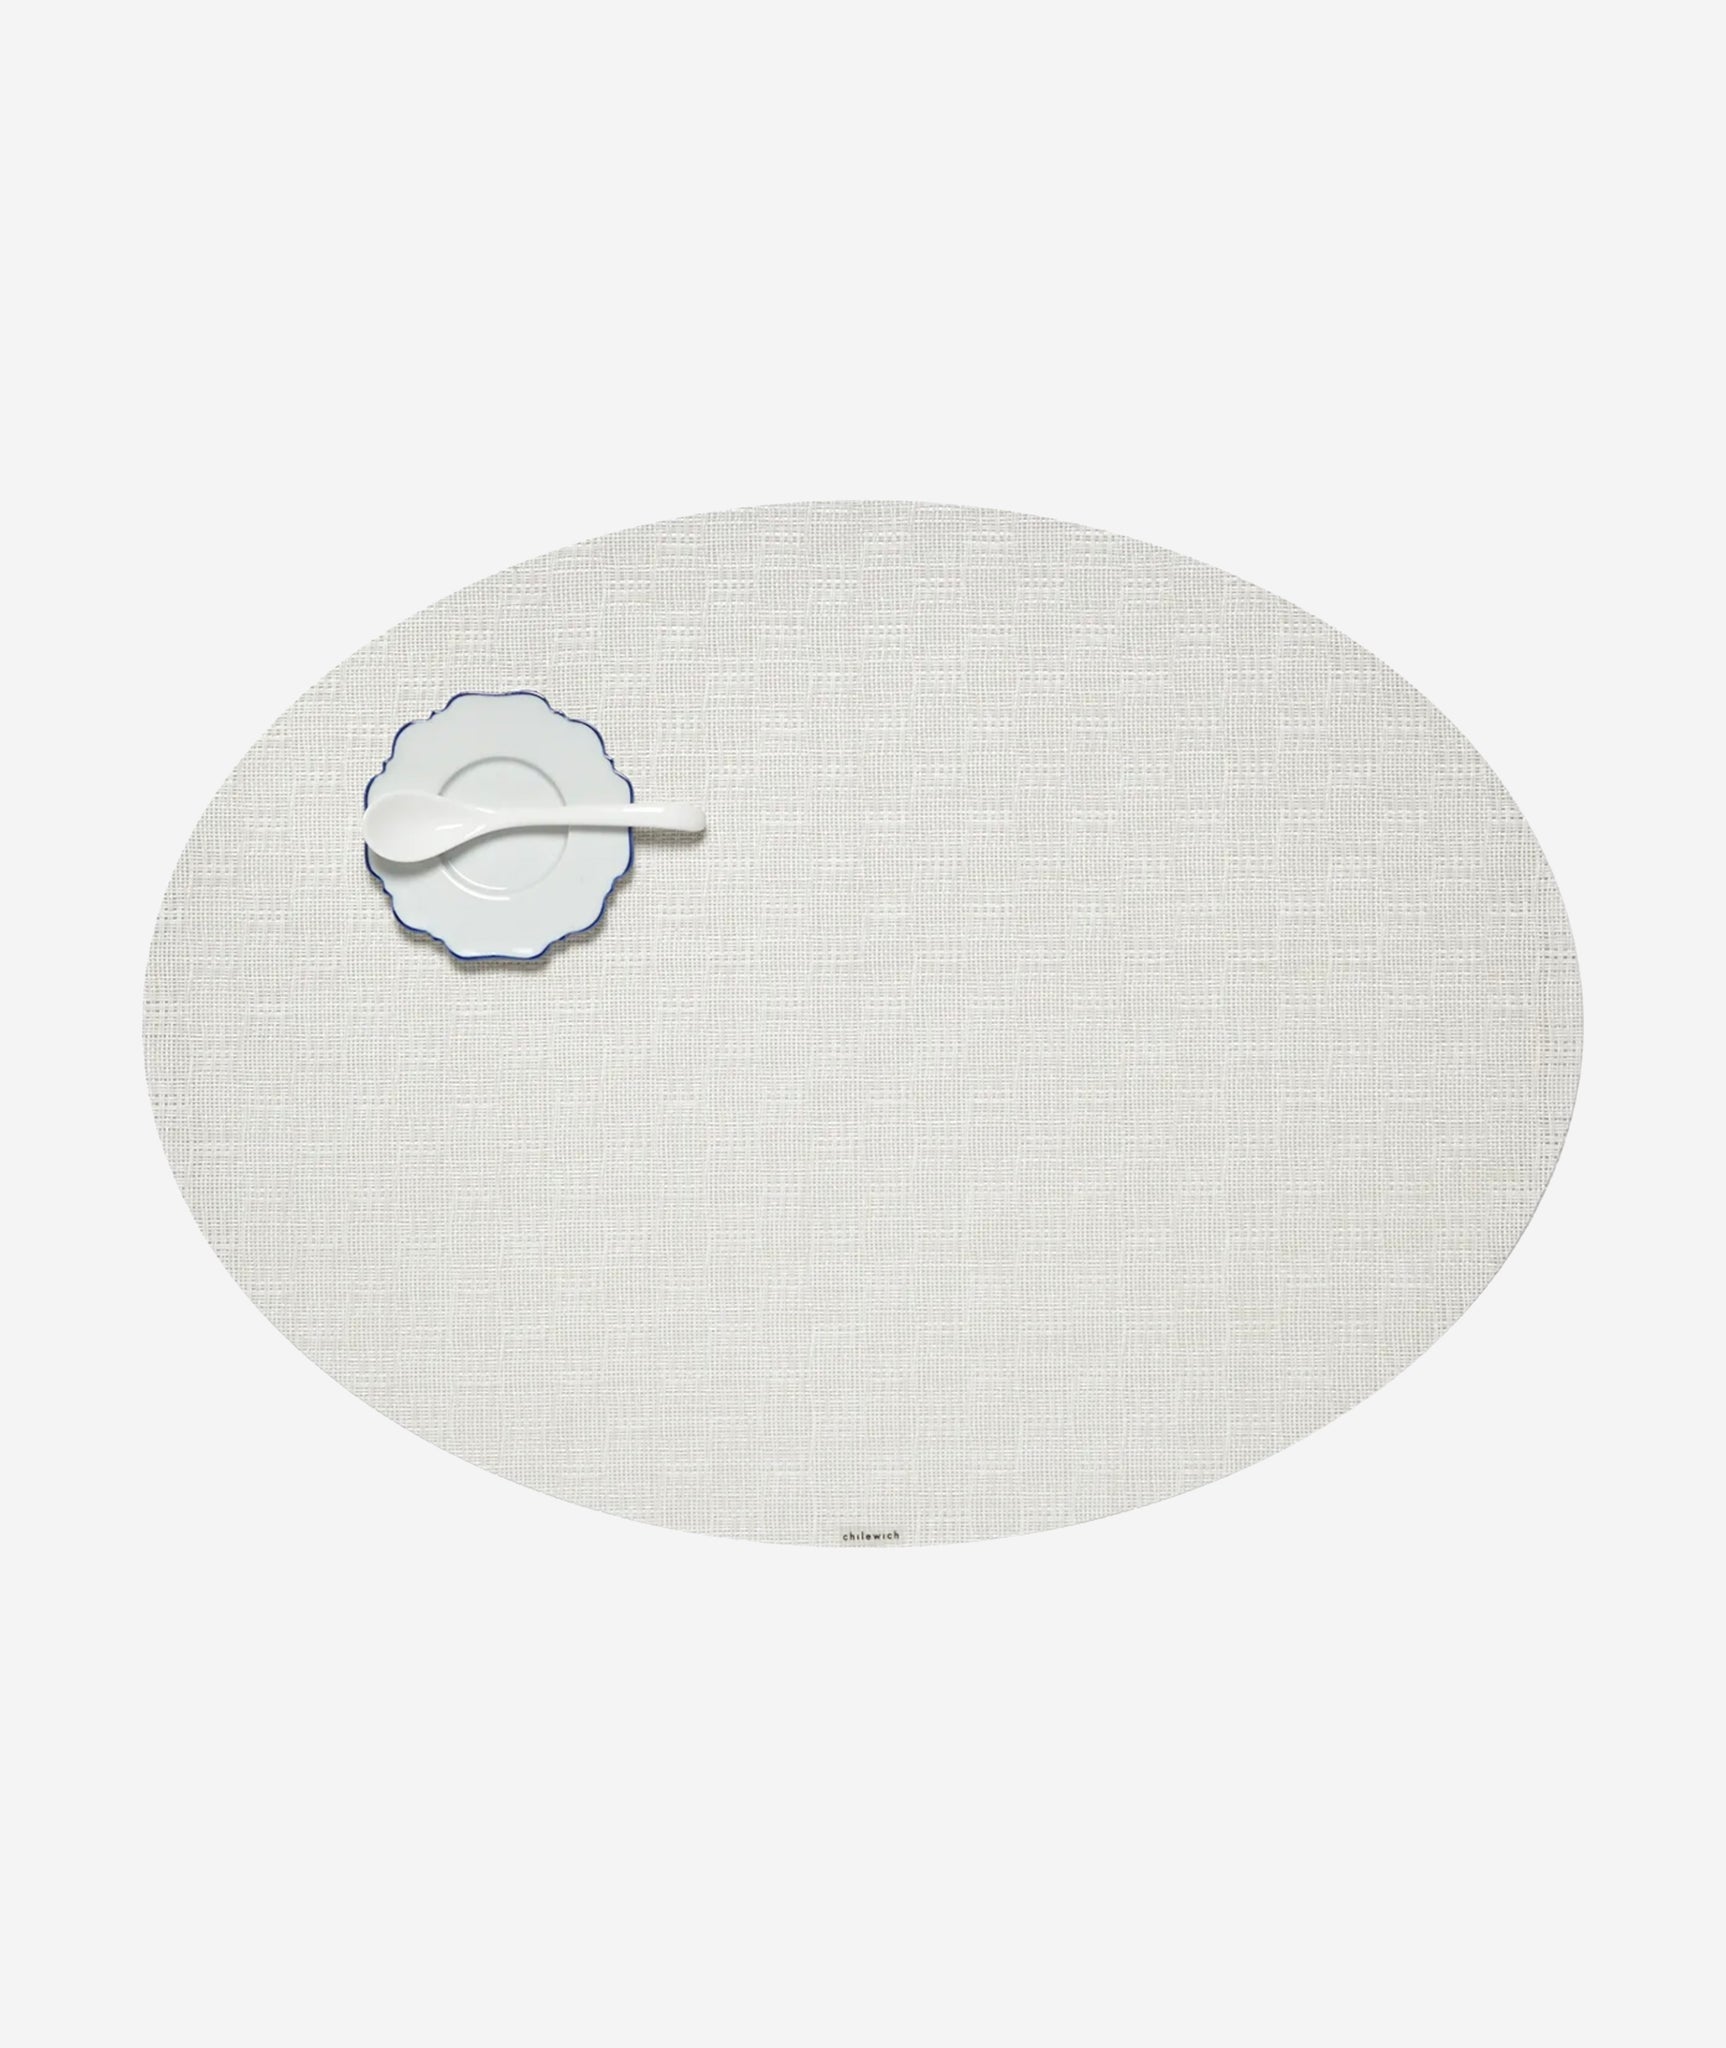 Bay Weave Oval Placemat Set/4 - More Options